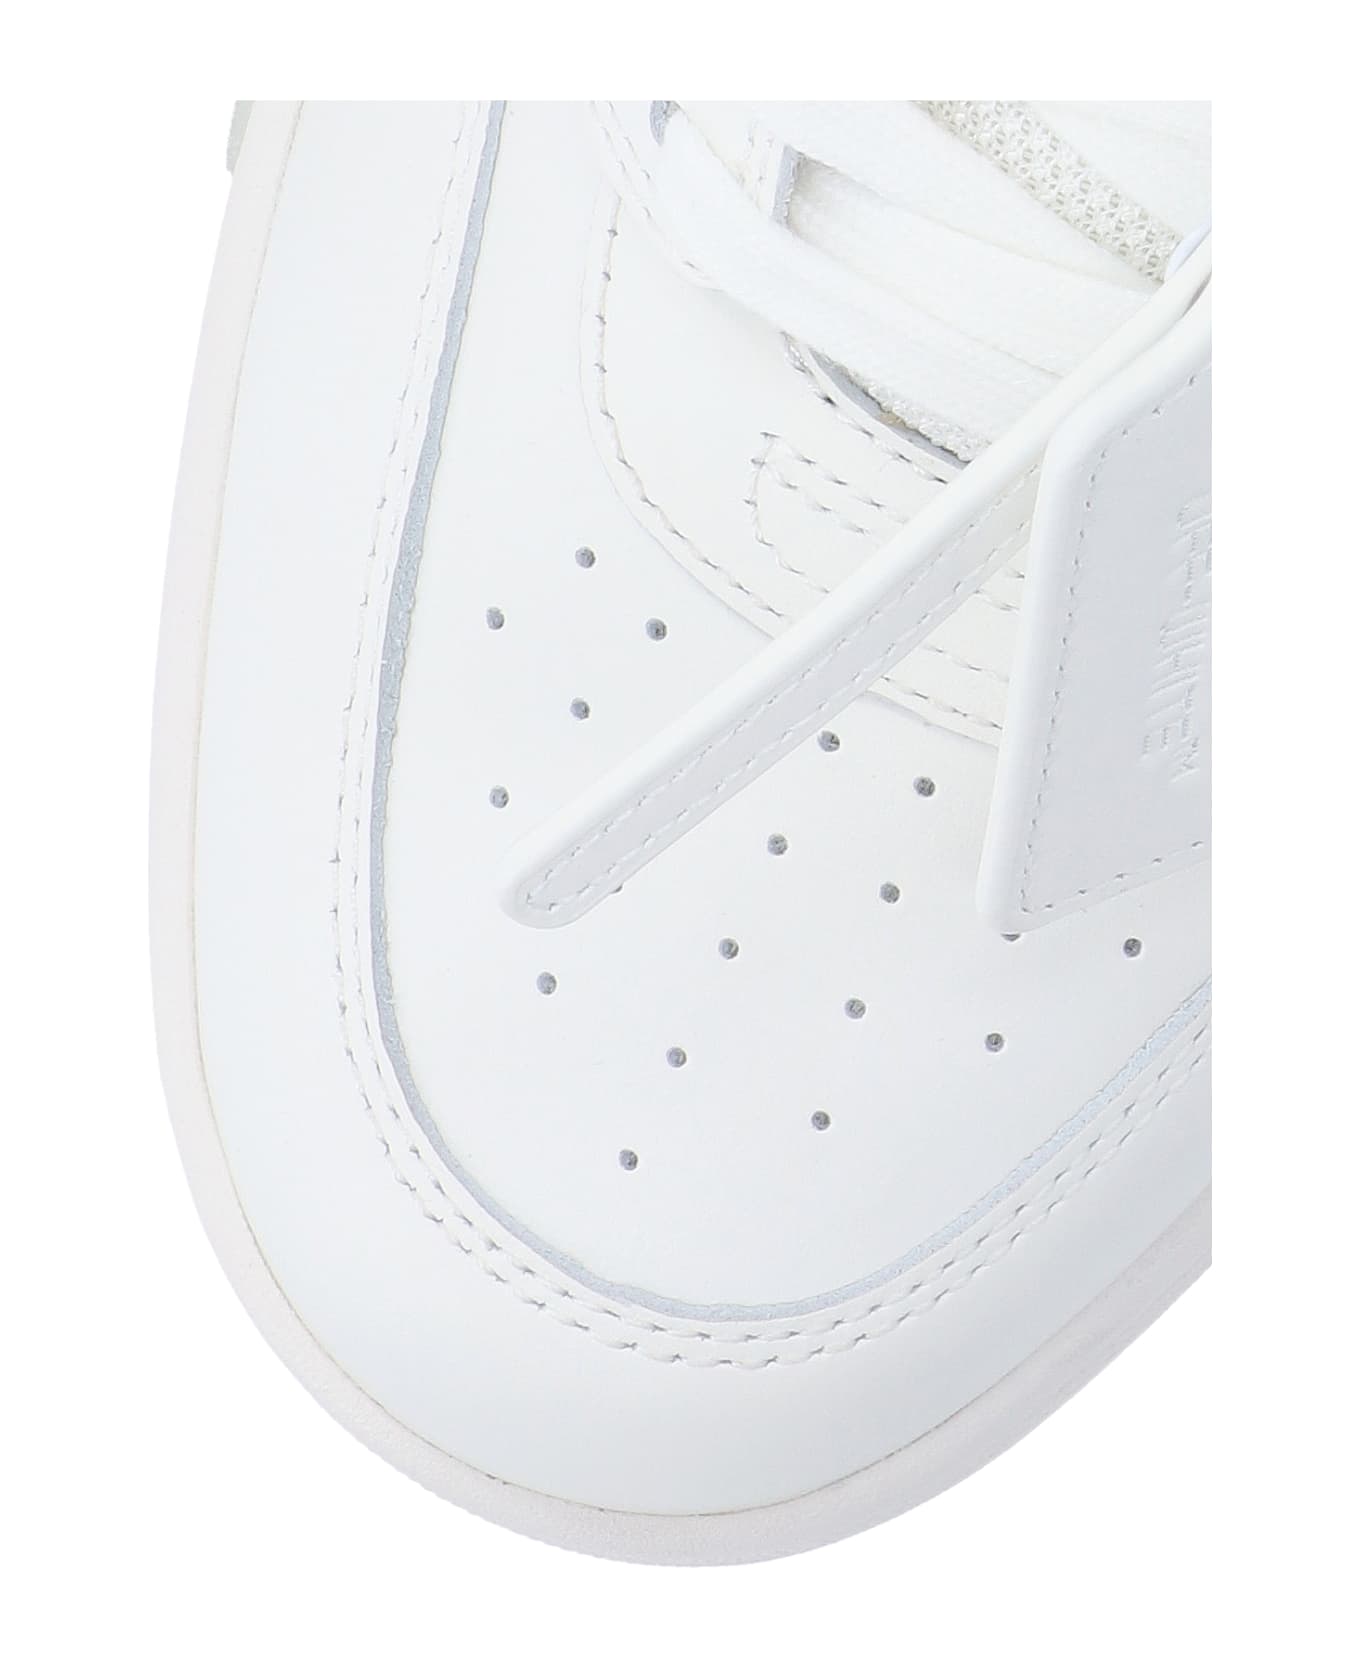 Off-White Sneakers High 'out Of Office' - White White